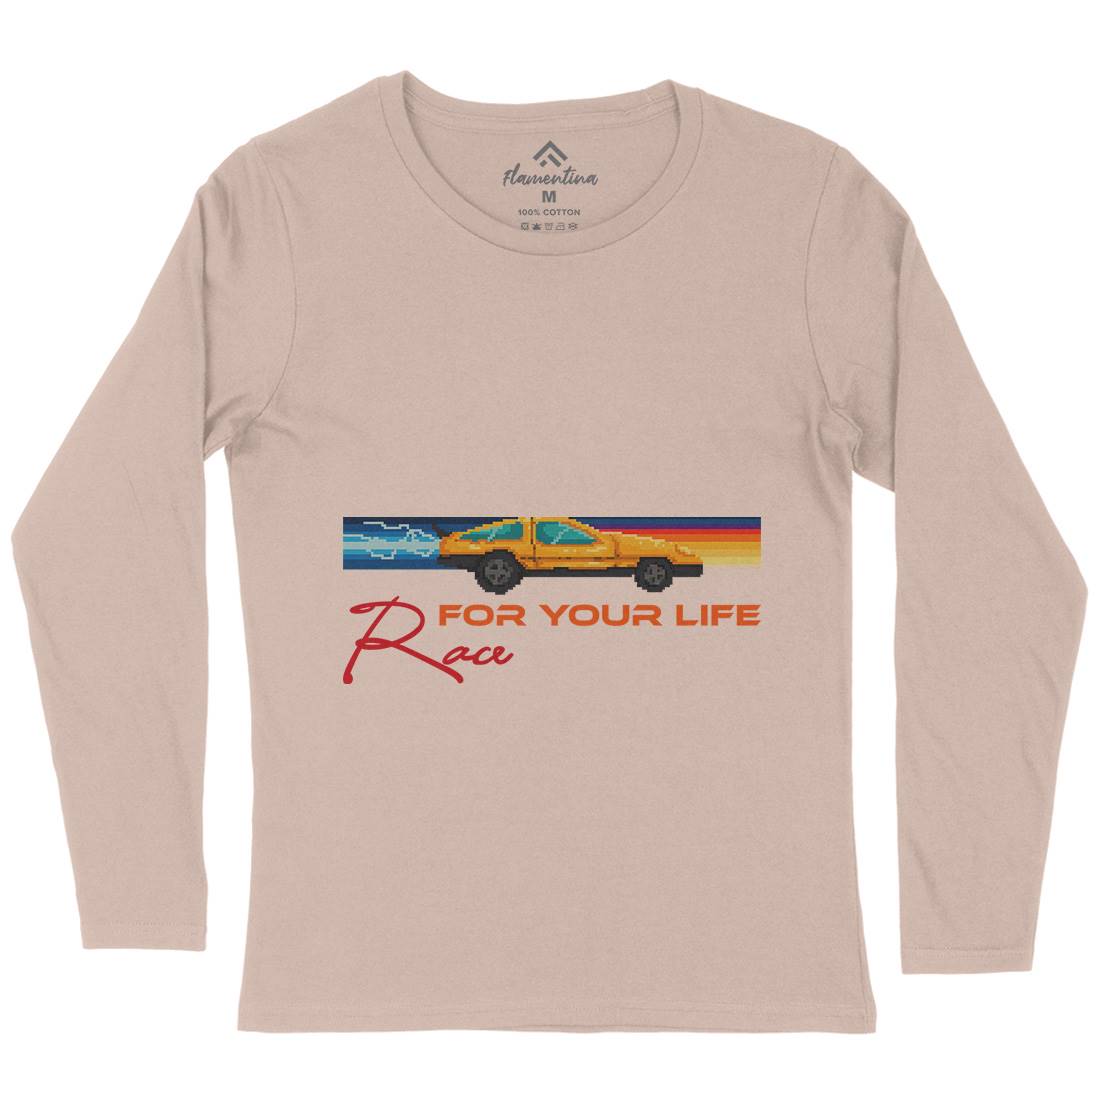 Race For Your Life Womens Long Sleeve T-Shirt Cars B951